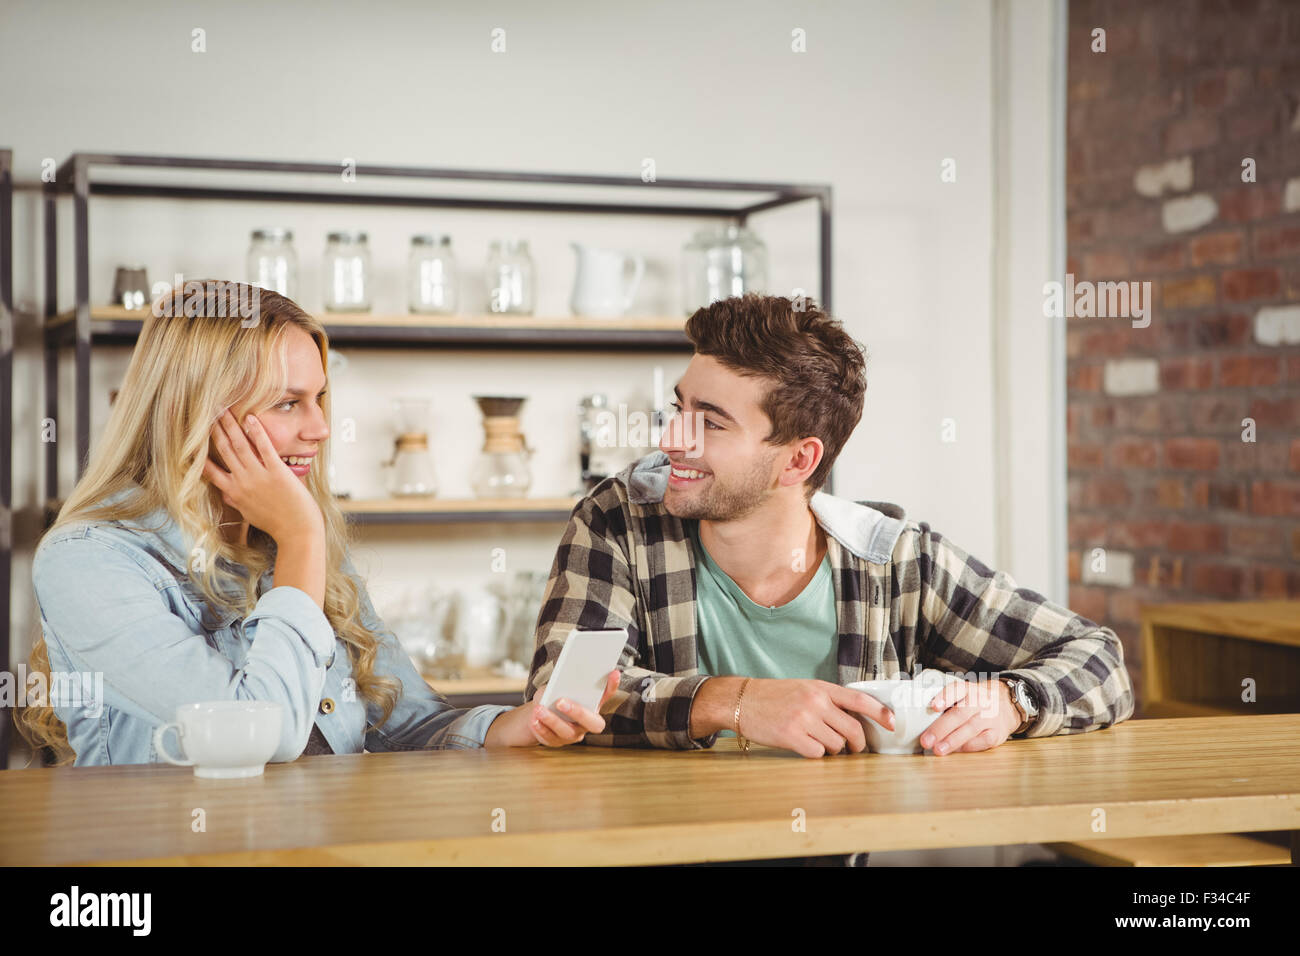 Smiling hipsters sitting and talking Stock Photo